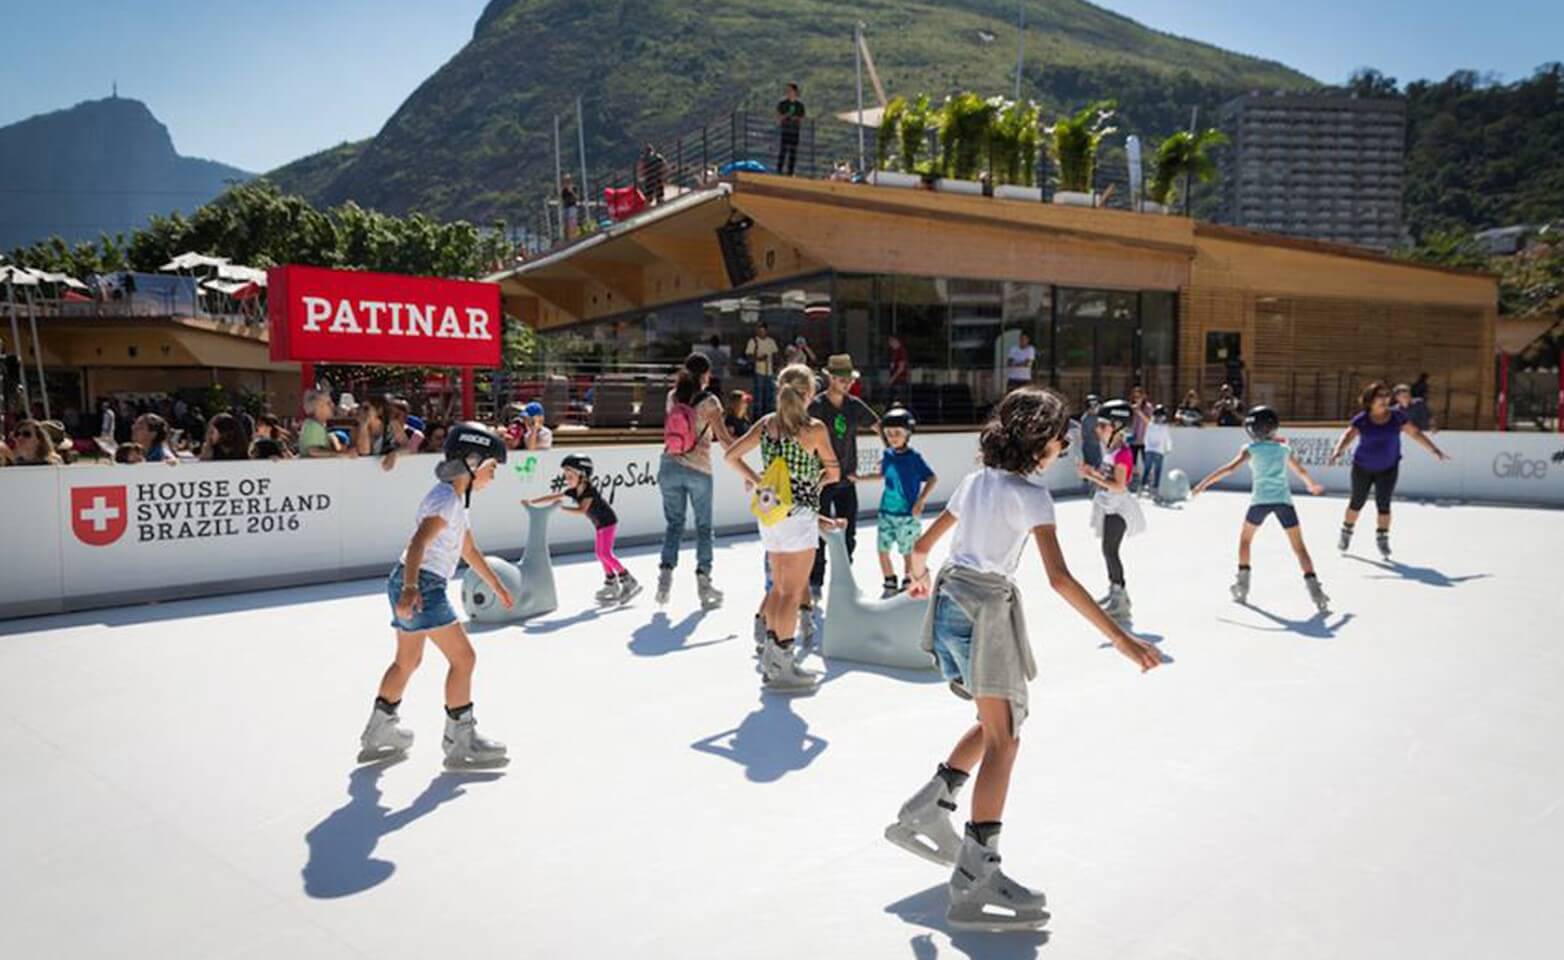 Synthetic-ice-rink-at-the-Olympic-Summer-games-2016-in-Brazil